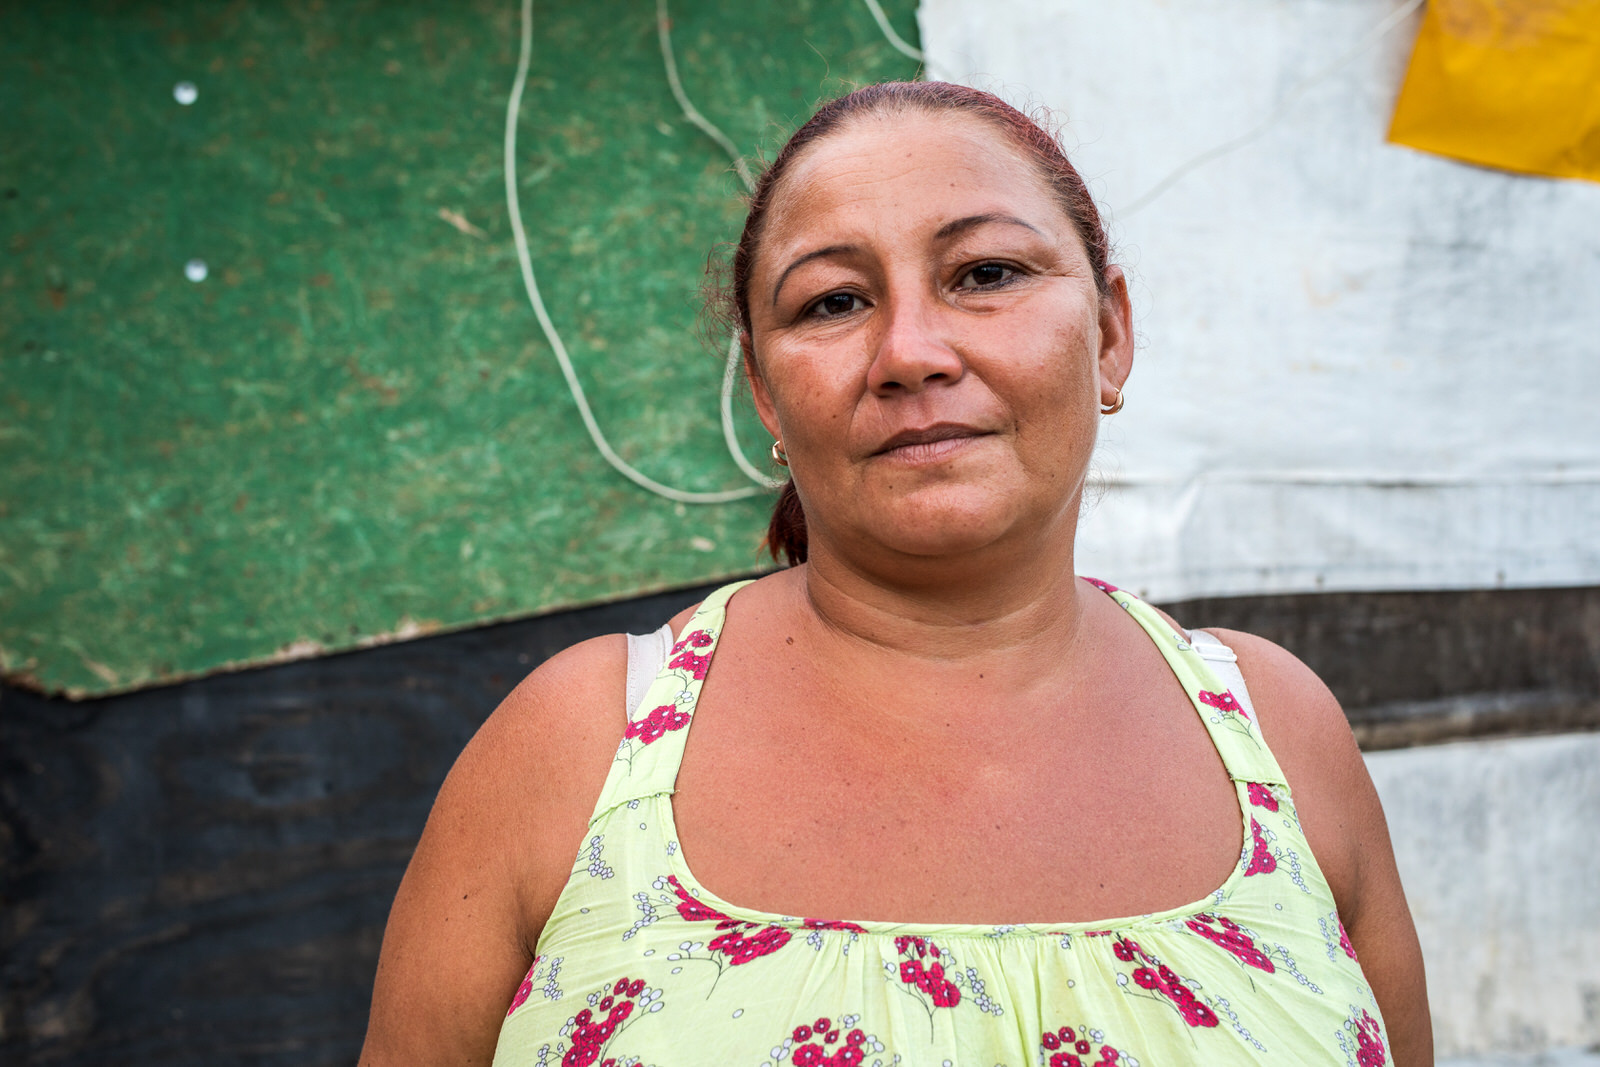  Maria Lucianne Lobato Ferreira (Lôra), a leader from Guerreira Maria and state coordinator for MSTB. Lôra says she doesn’t feel that she has the right to the city. 